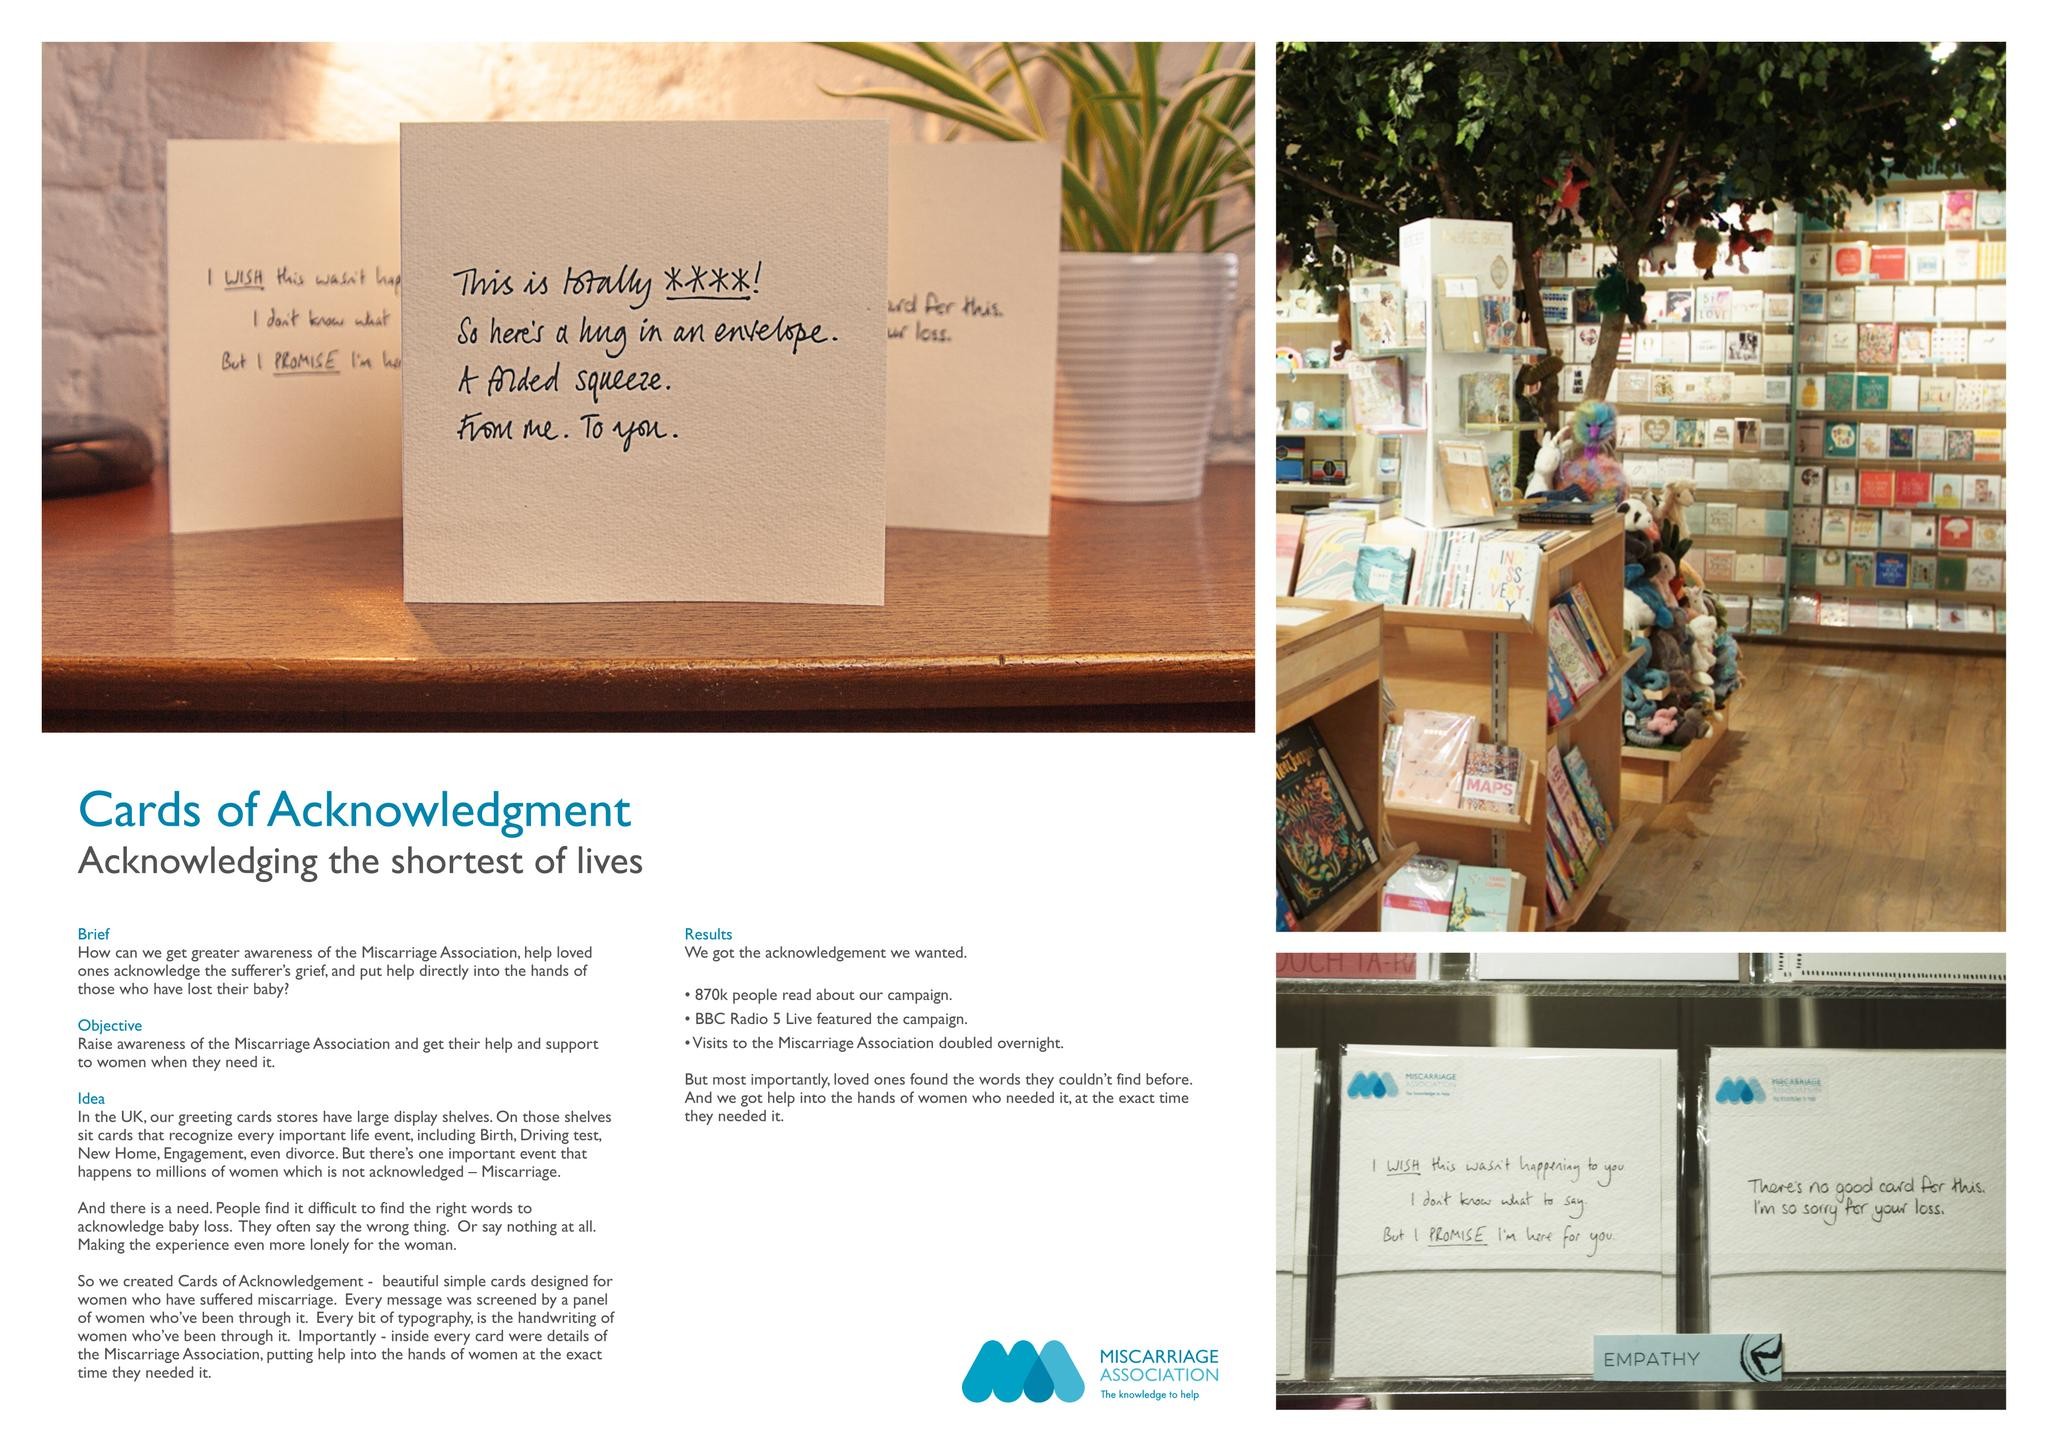 MISCARRIAGE ASSOCIATION - CARDS OF ACKNOWLEDGEMENT